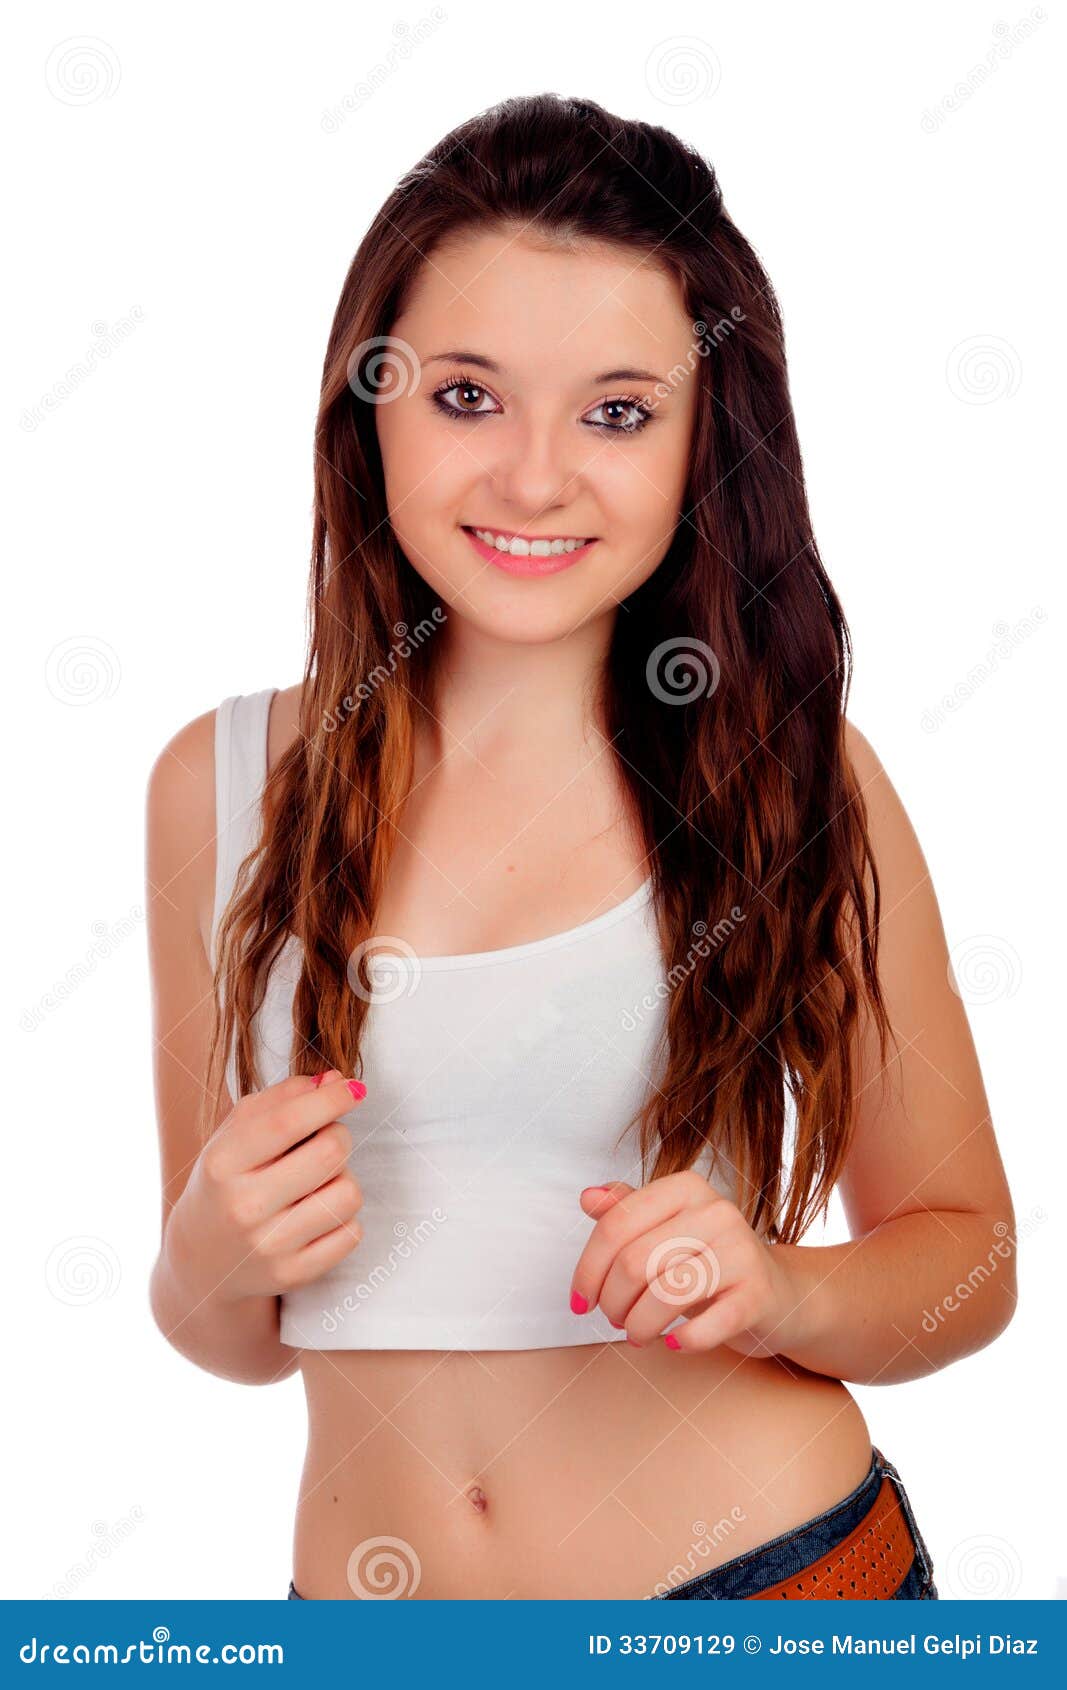 Natural Teen Girl With Copper Hair Stock Image Image Of